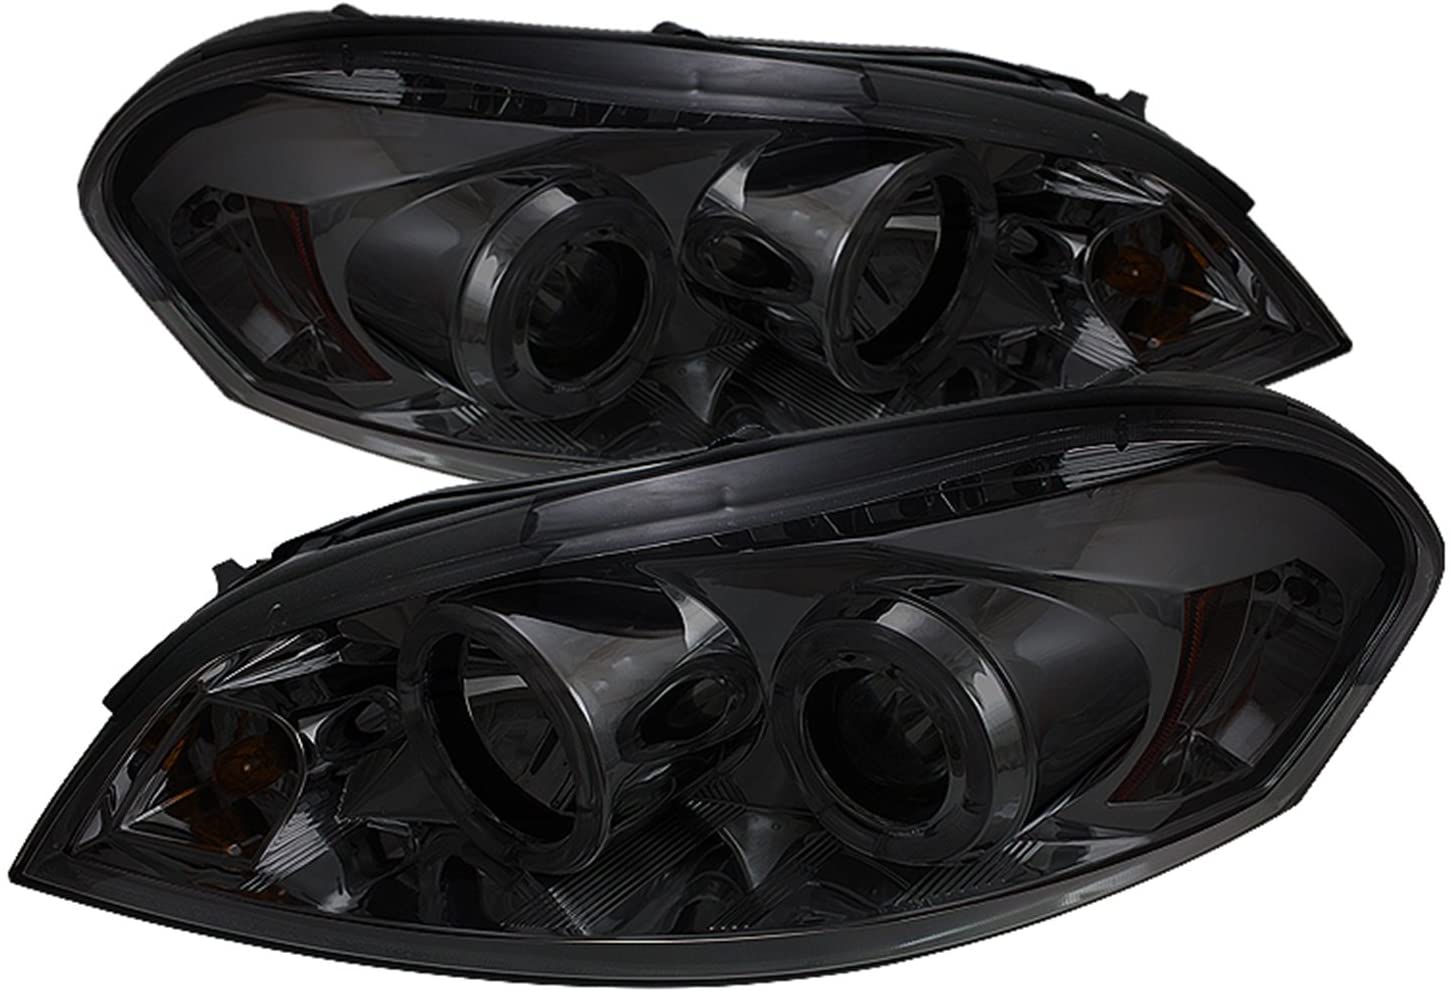 Spyder 5078308 Chevy Impala 06-13 / Chevy Monte Carlo 06-07 - Projector Headlights - LED Halo - LED (Replaceable LEDs) - Black Smoke - High H1 (Included) - Low H1 (Included)